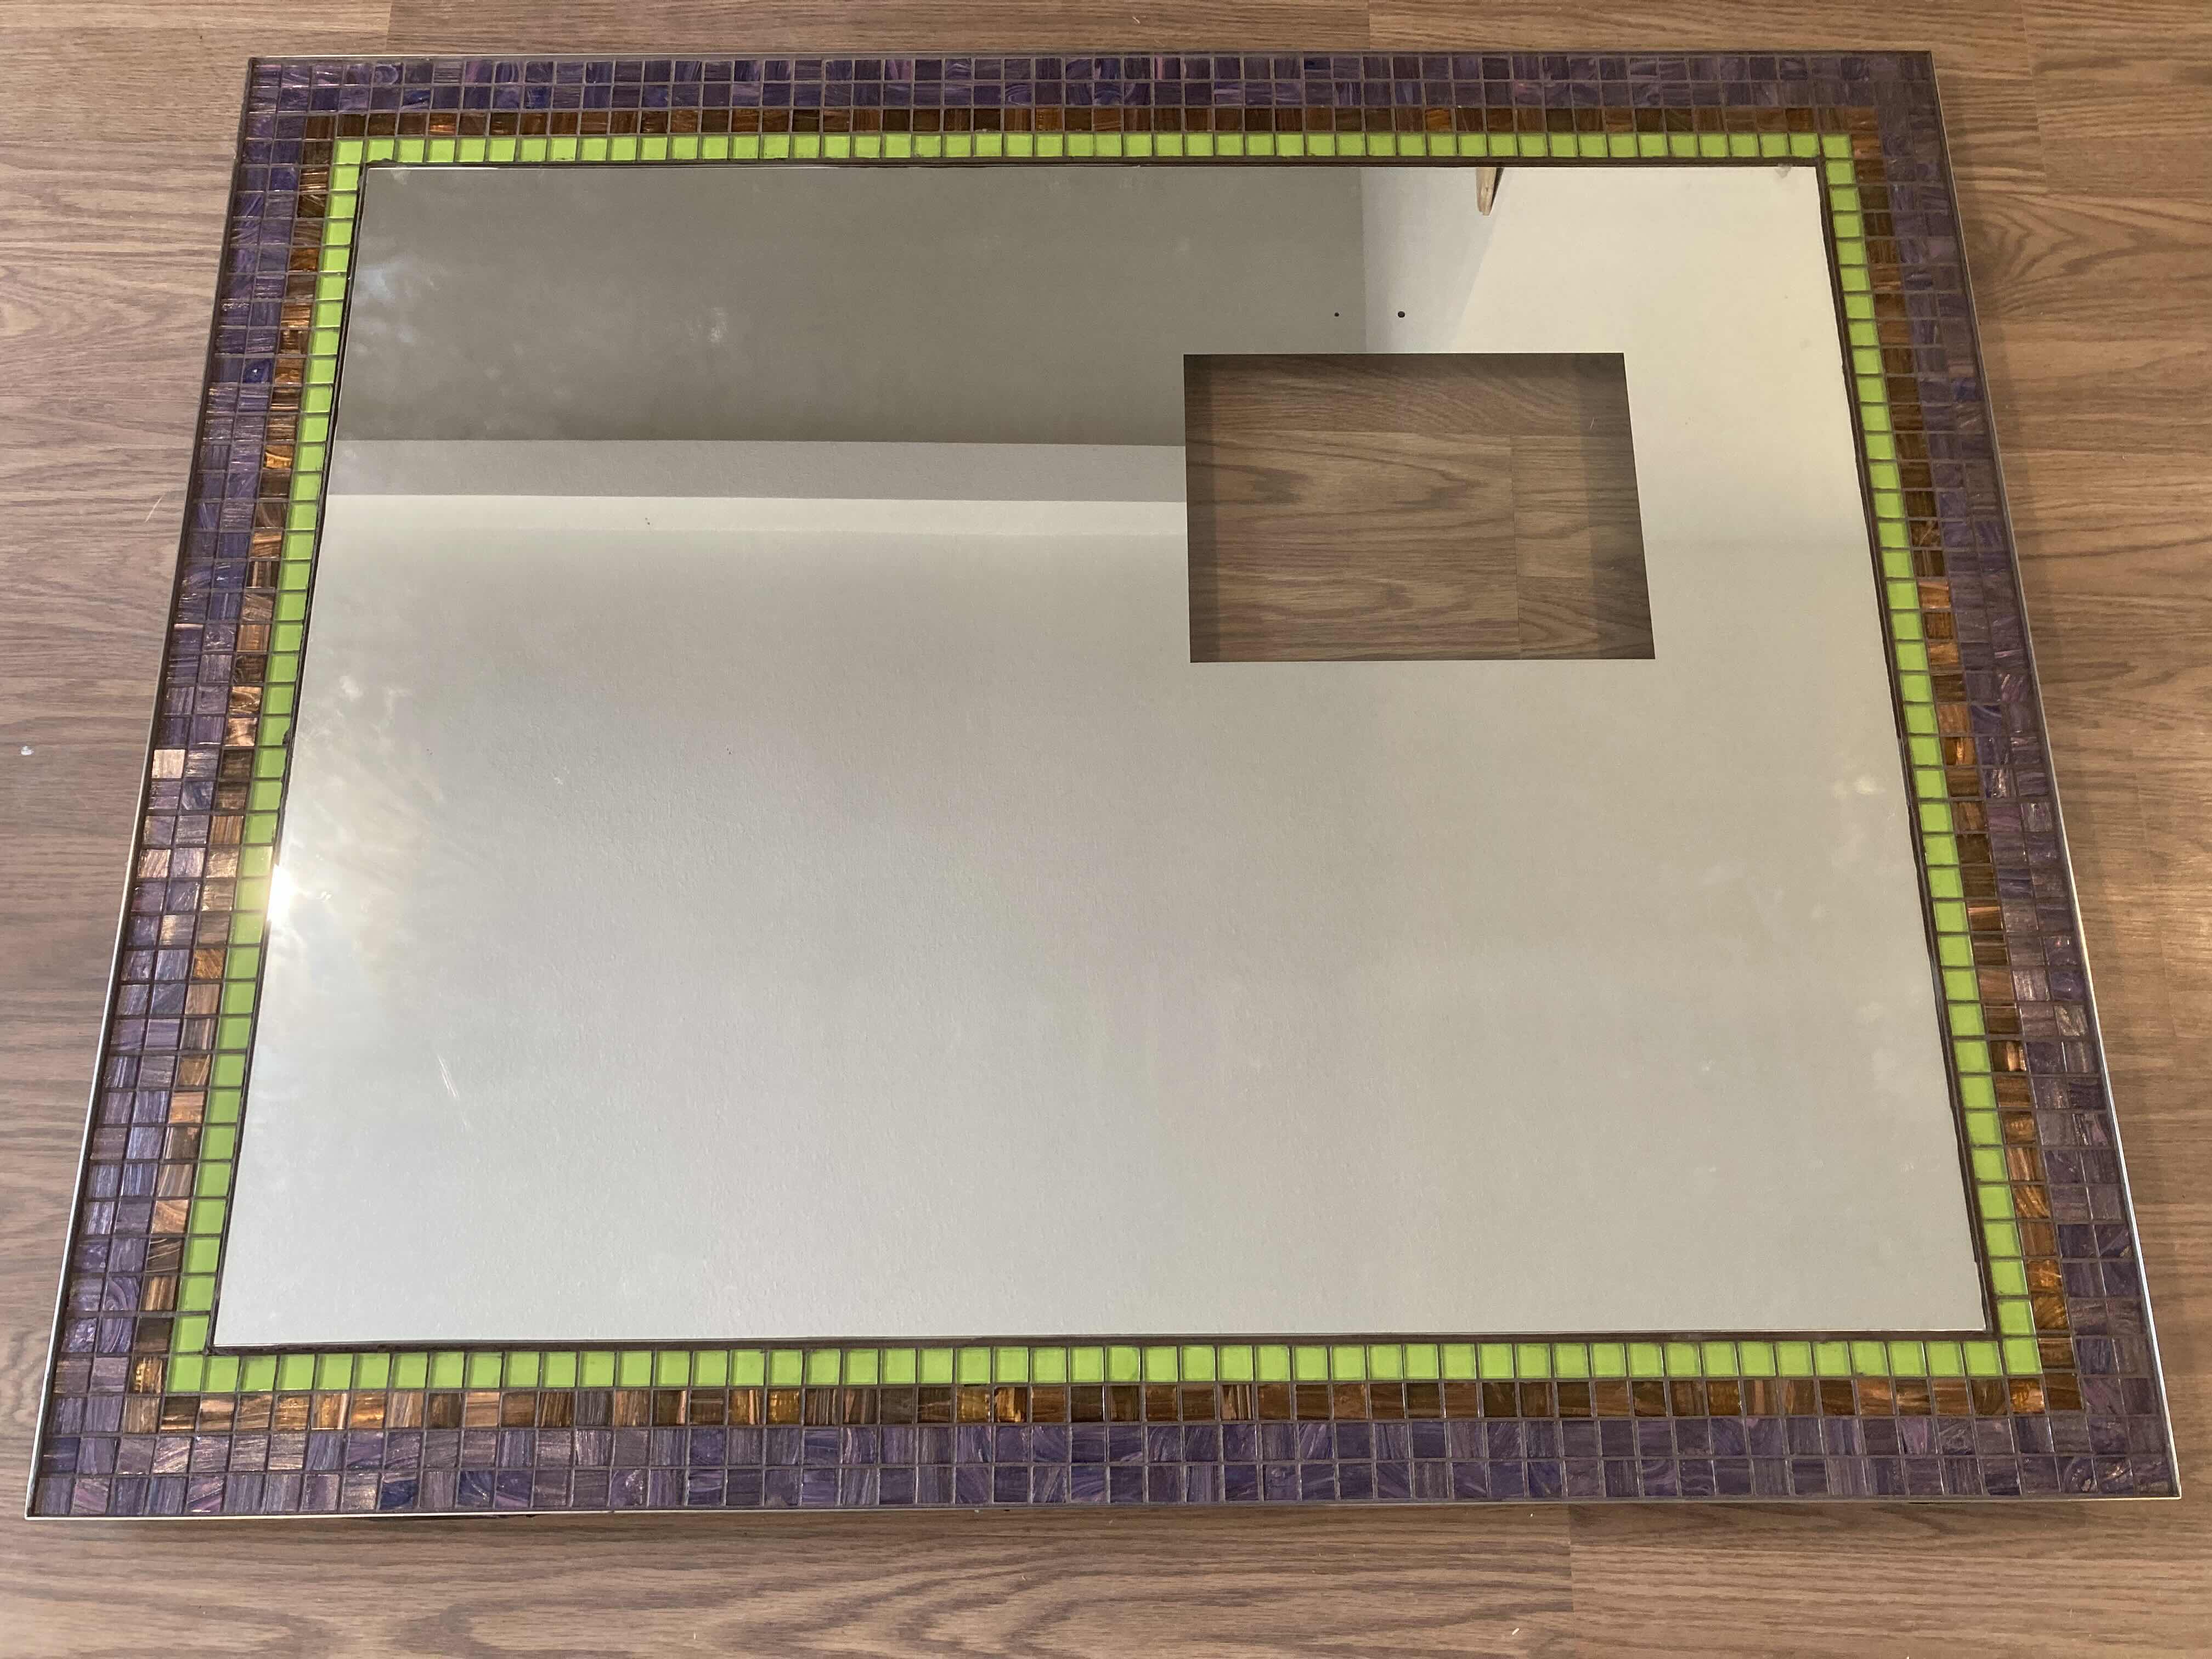 Photo 1 of ELECTRIC MIRROR CUSTOM MADE MOSAIC TILE FRAMED MIRROR W 14.5” TV SLOT (TV REMOVED) 47.75” X 2” H38.5”